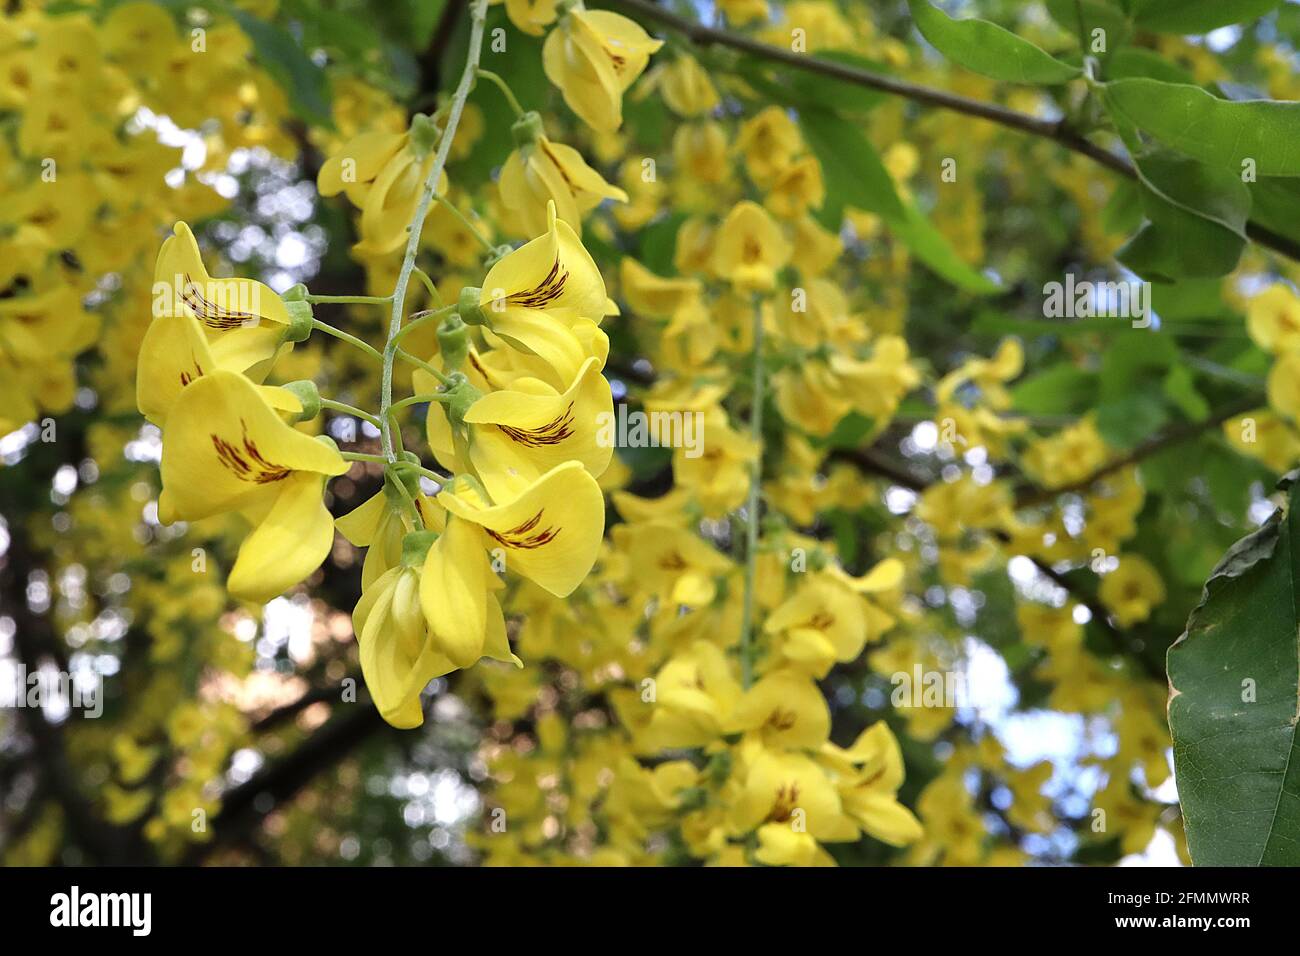 Laburnum x anagyroides ‘Yellow Rocket’ Golden chain tree – yellow pea-like flowers with brown blotch, fresh green ovate leaves,  May, England, UK Stock Photo